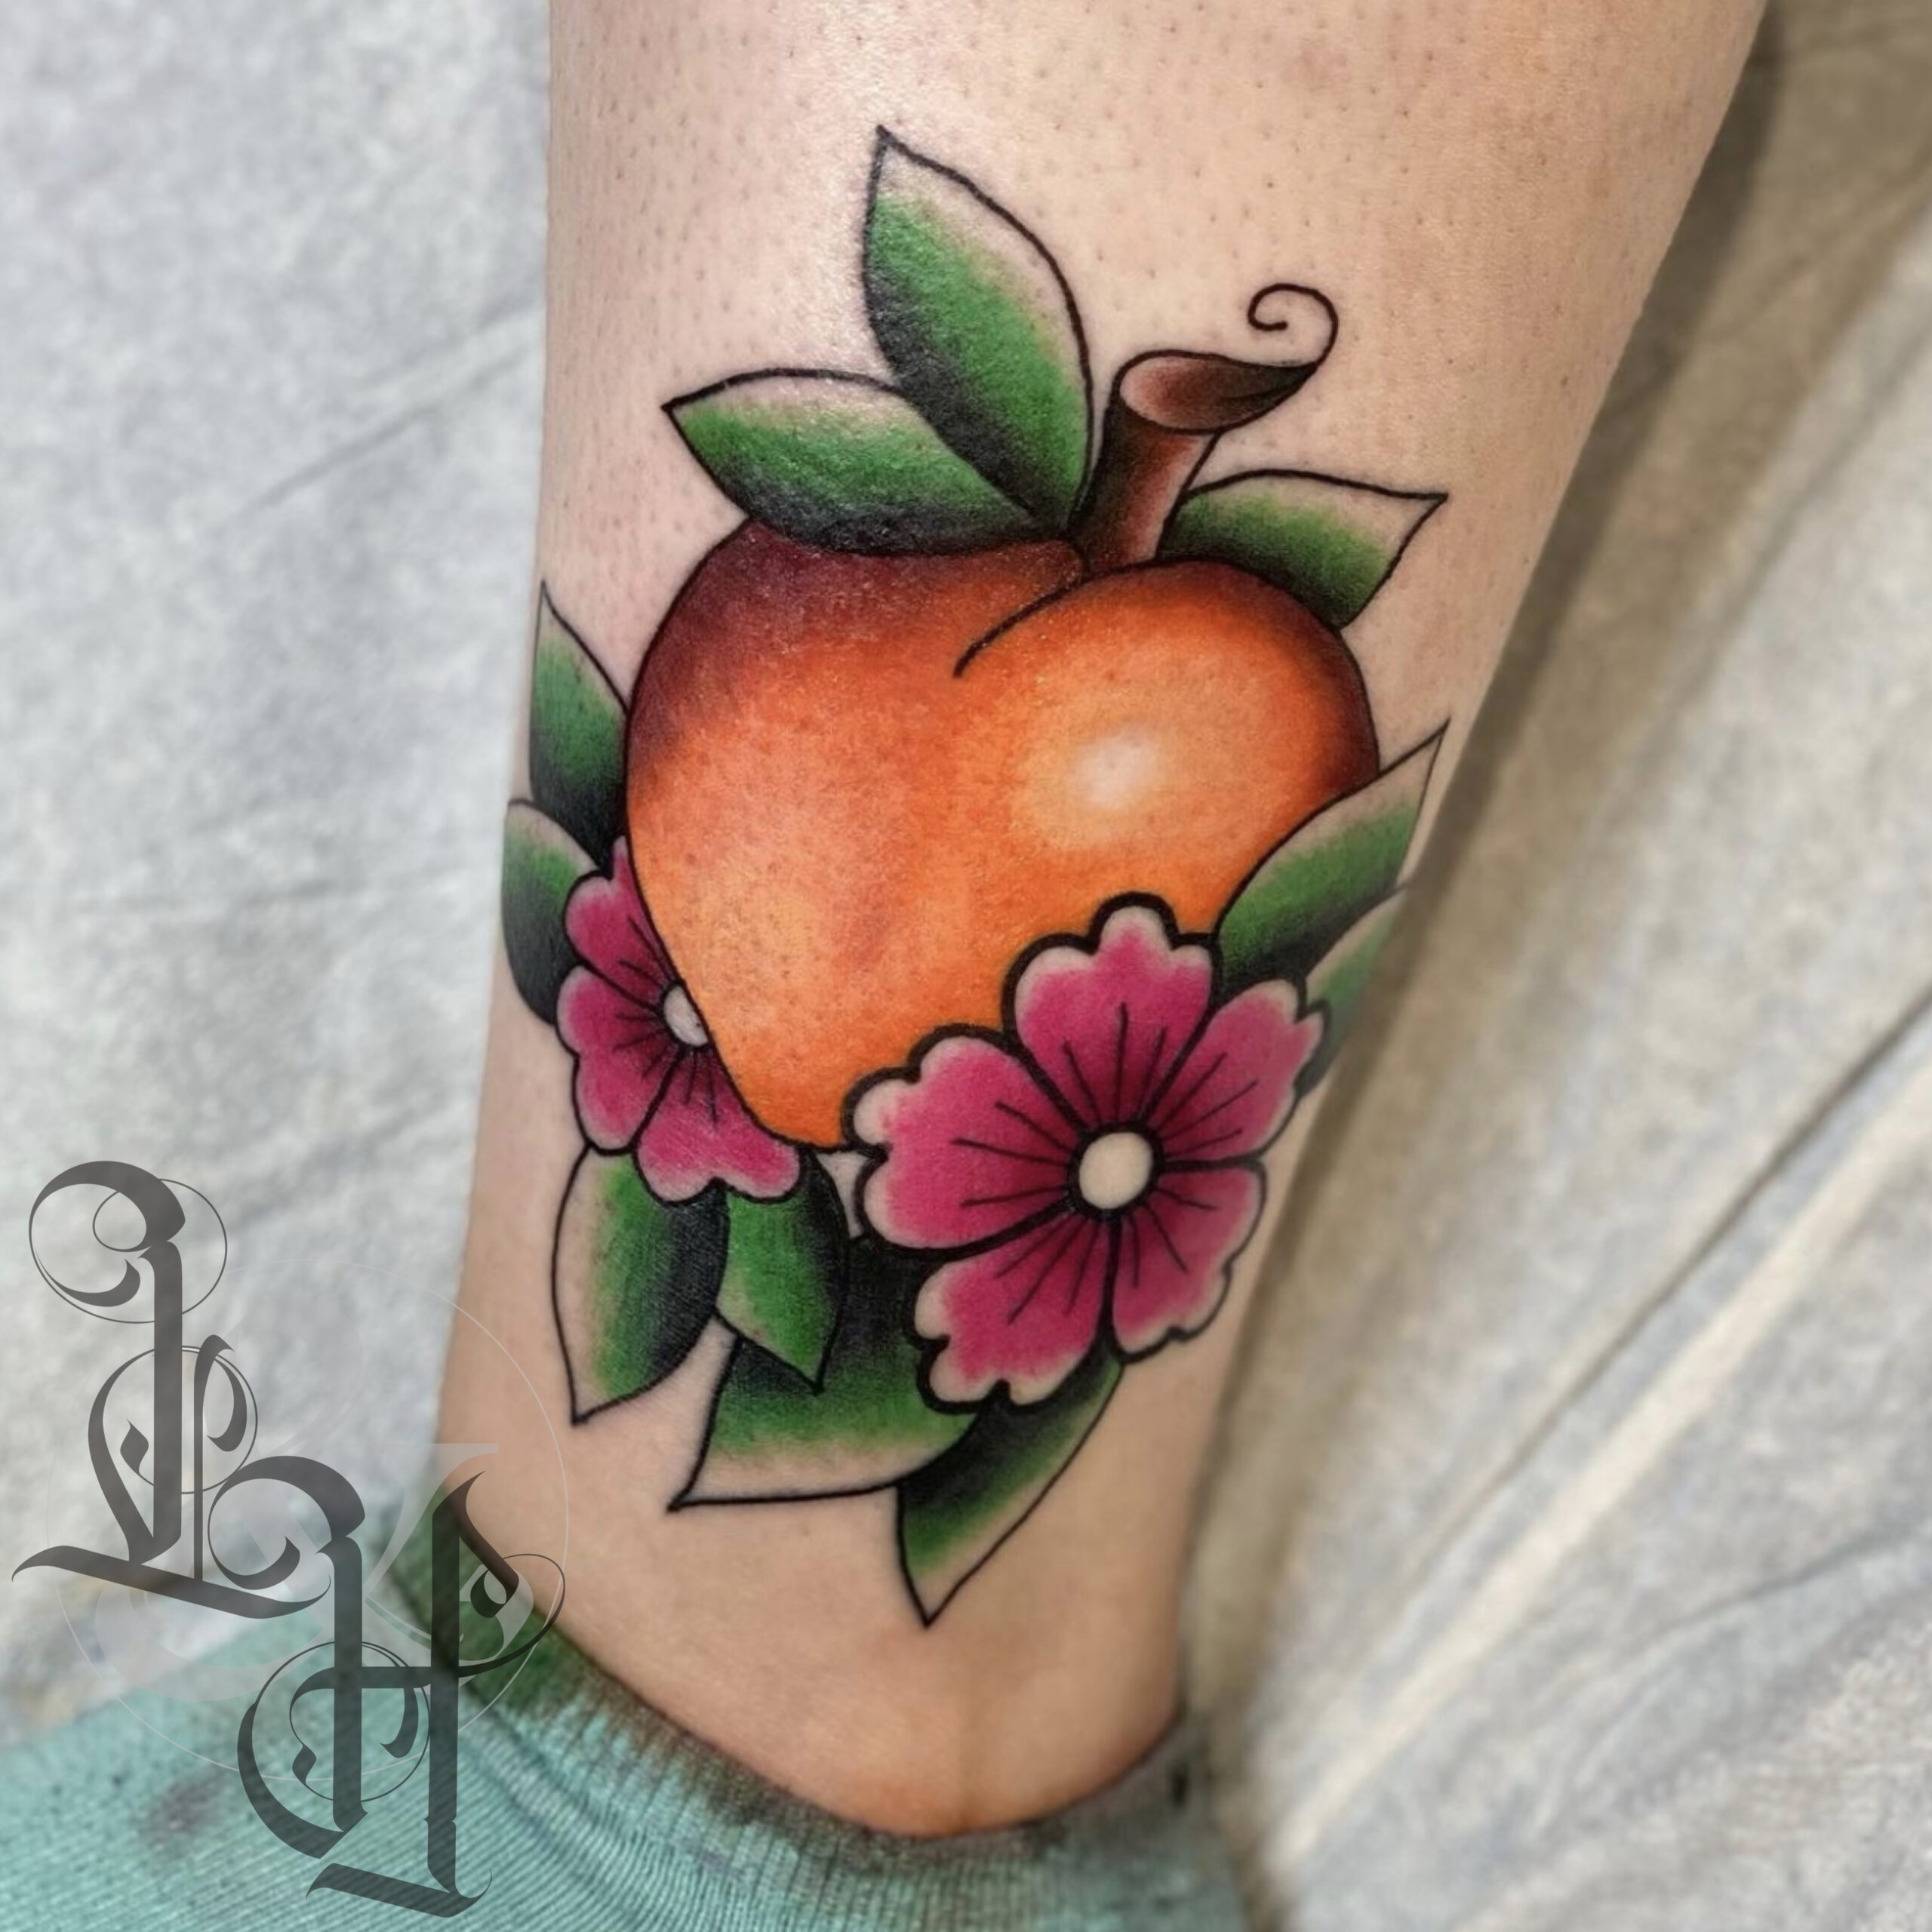 30 Crazy Peach Tattoos with Meanings and Ideas  Body Art Guru